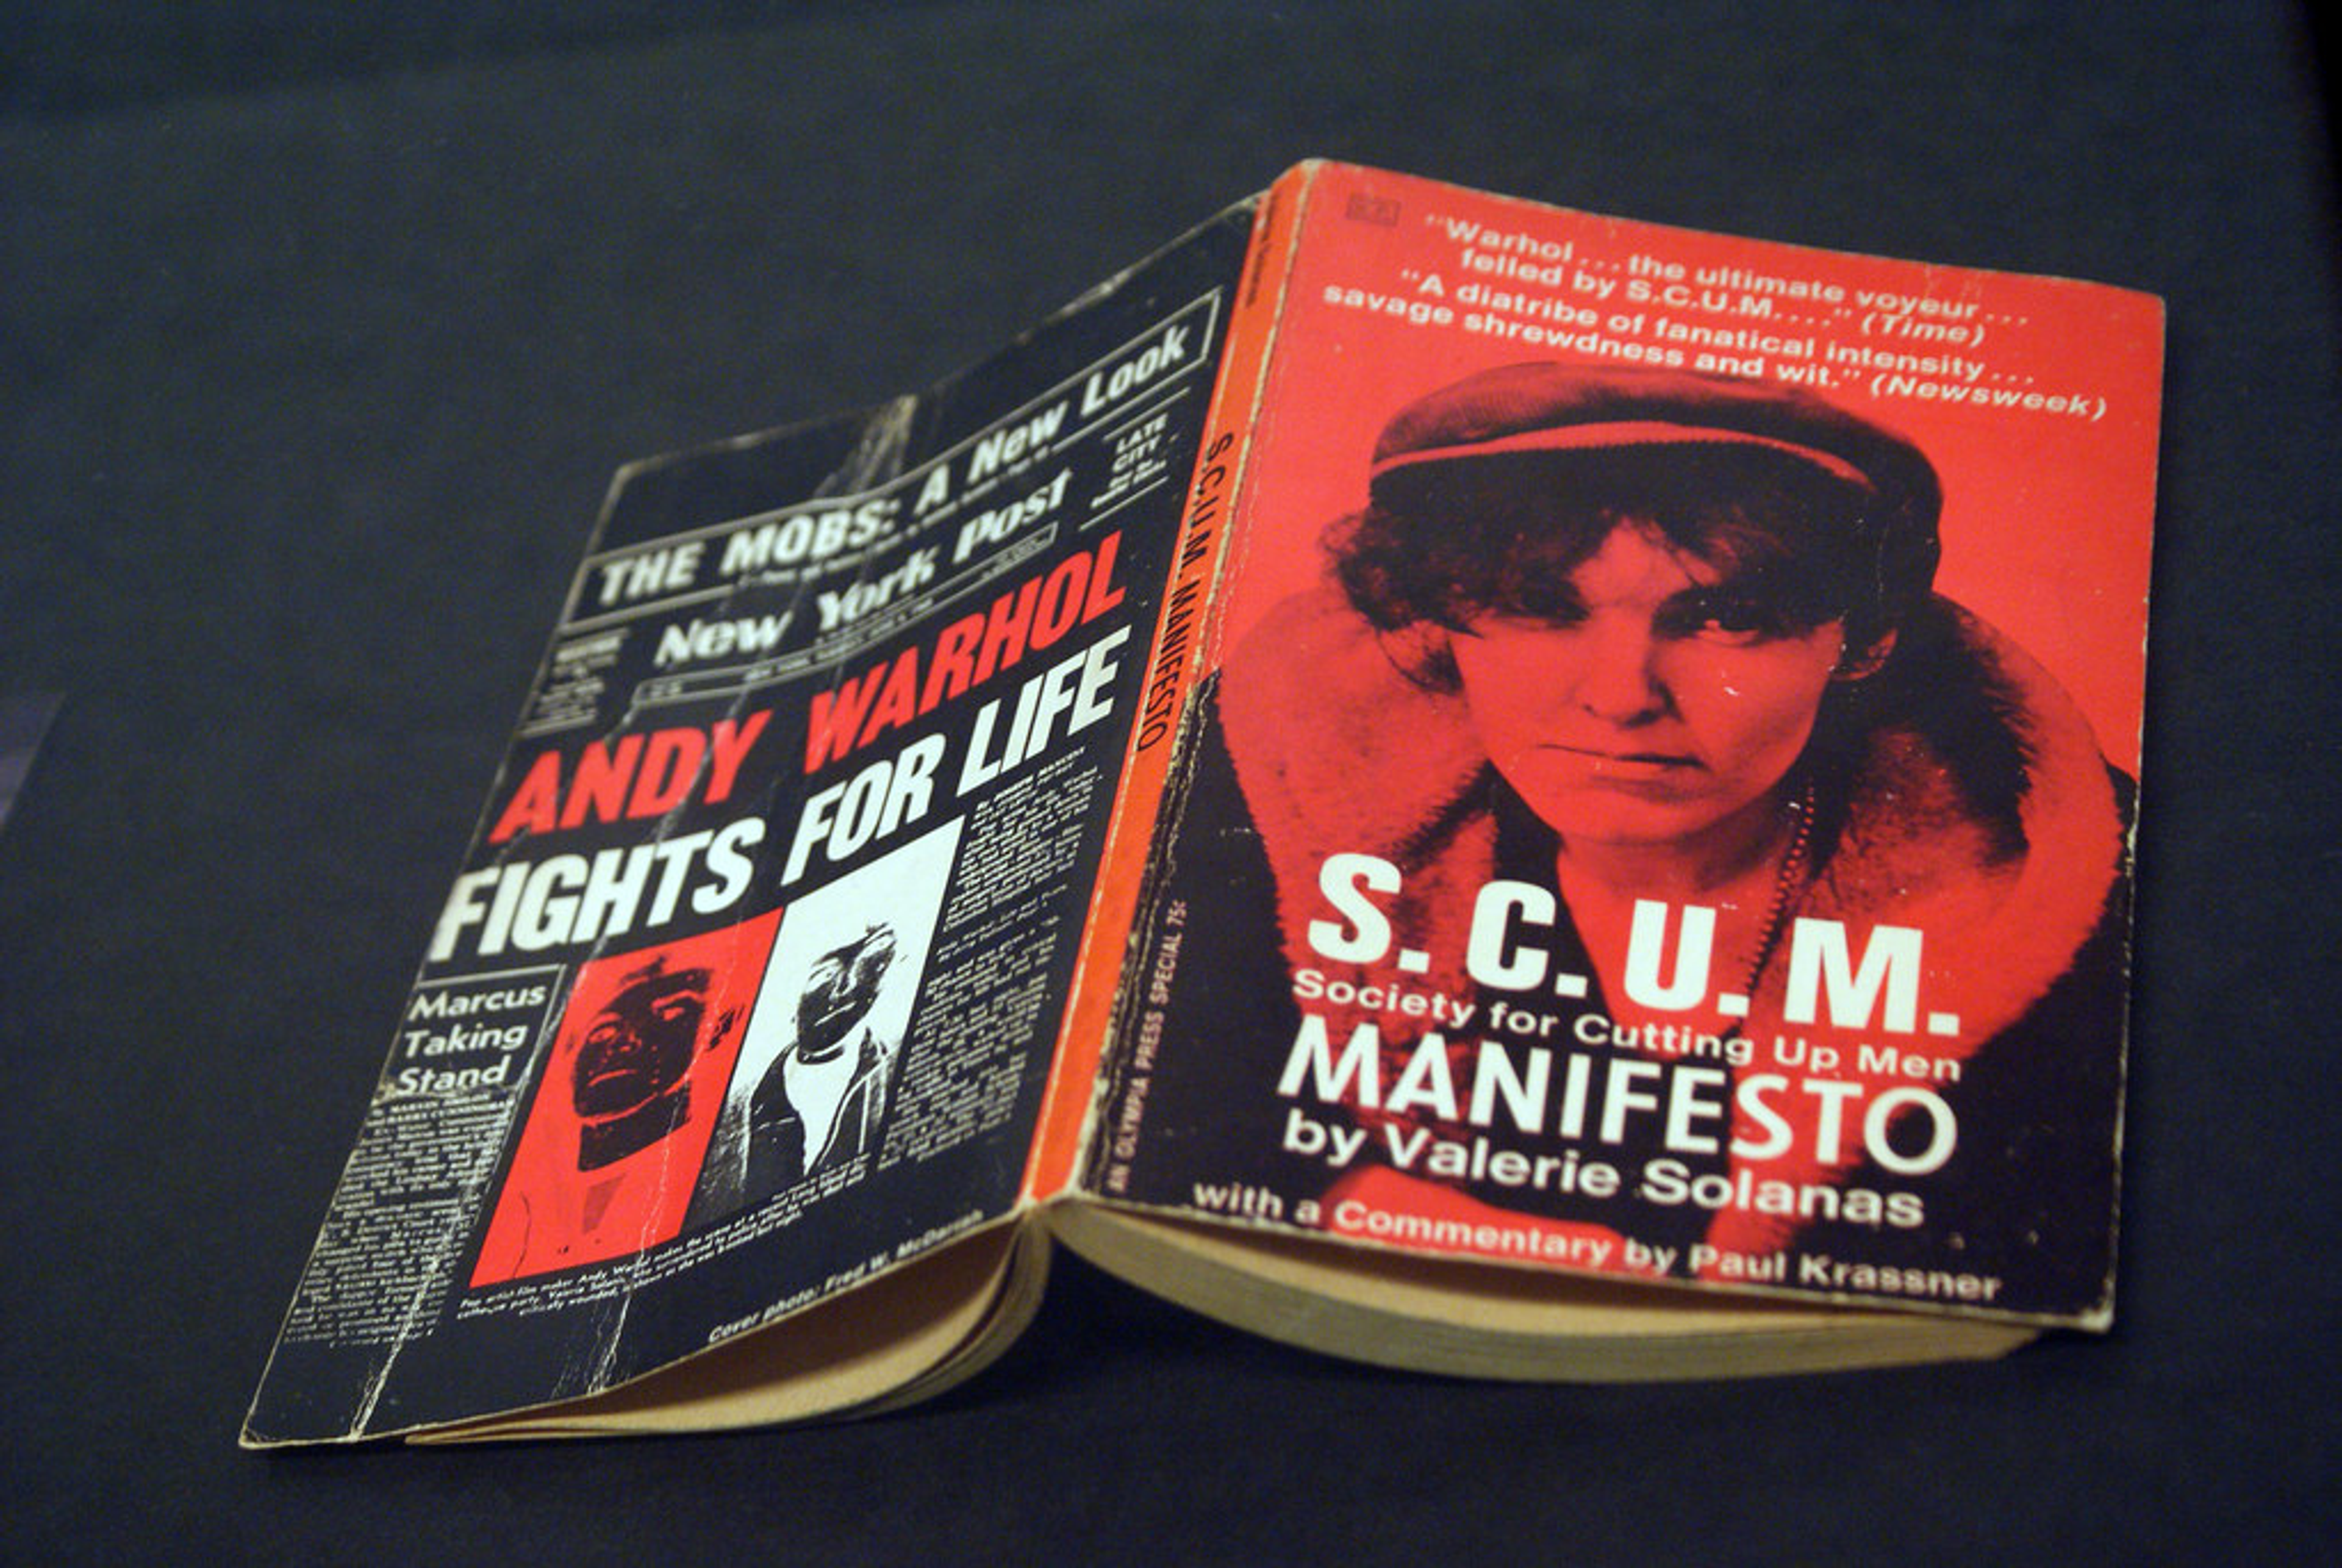 This image shows the front and back cover of Solana's book, SCUM Manifesto. The author is shown on the front cover, while the headline "Andy Warhol fights for life" is on the back.